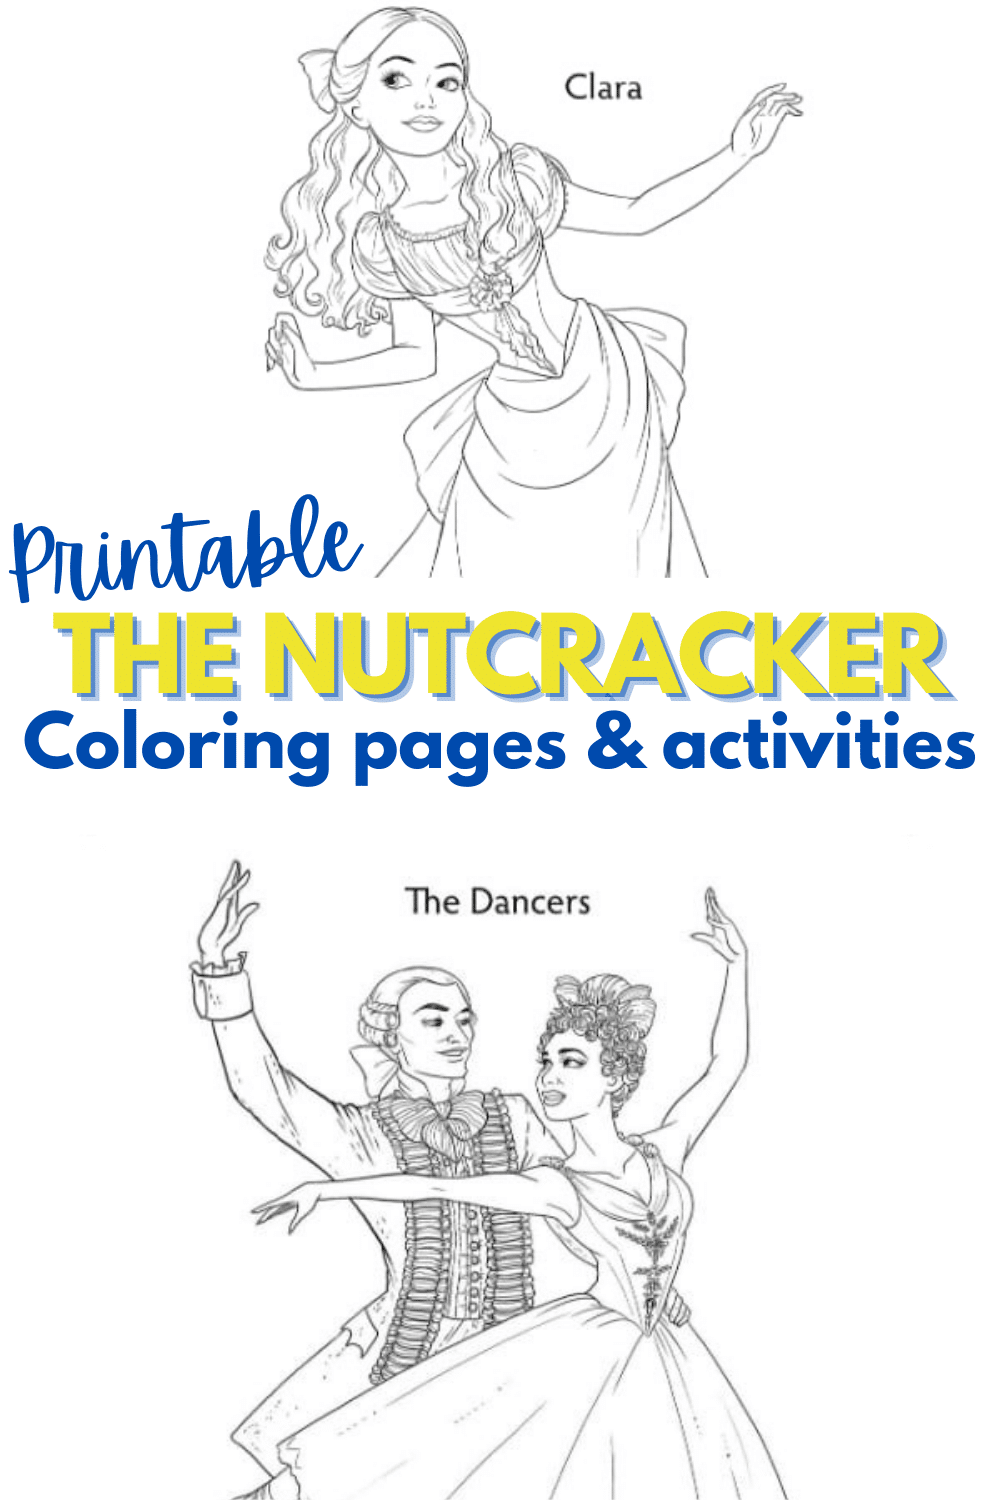 This activity book has 11 different Nutcracker coloring pages, 3 activities and printable bookmarks too! Completely free to download and print. #TheNutcracker #printables #activitybook #coloringpages via @wondermomwannab